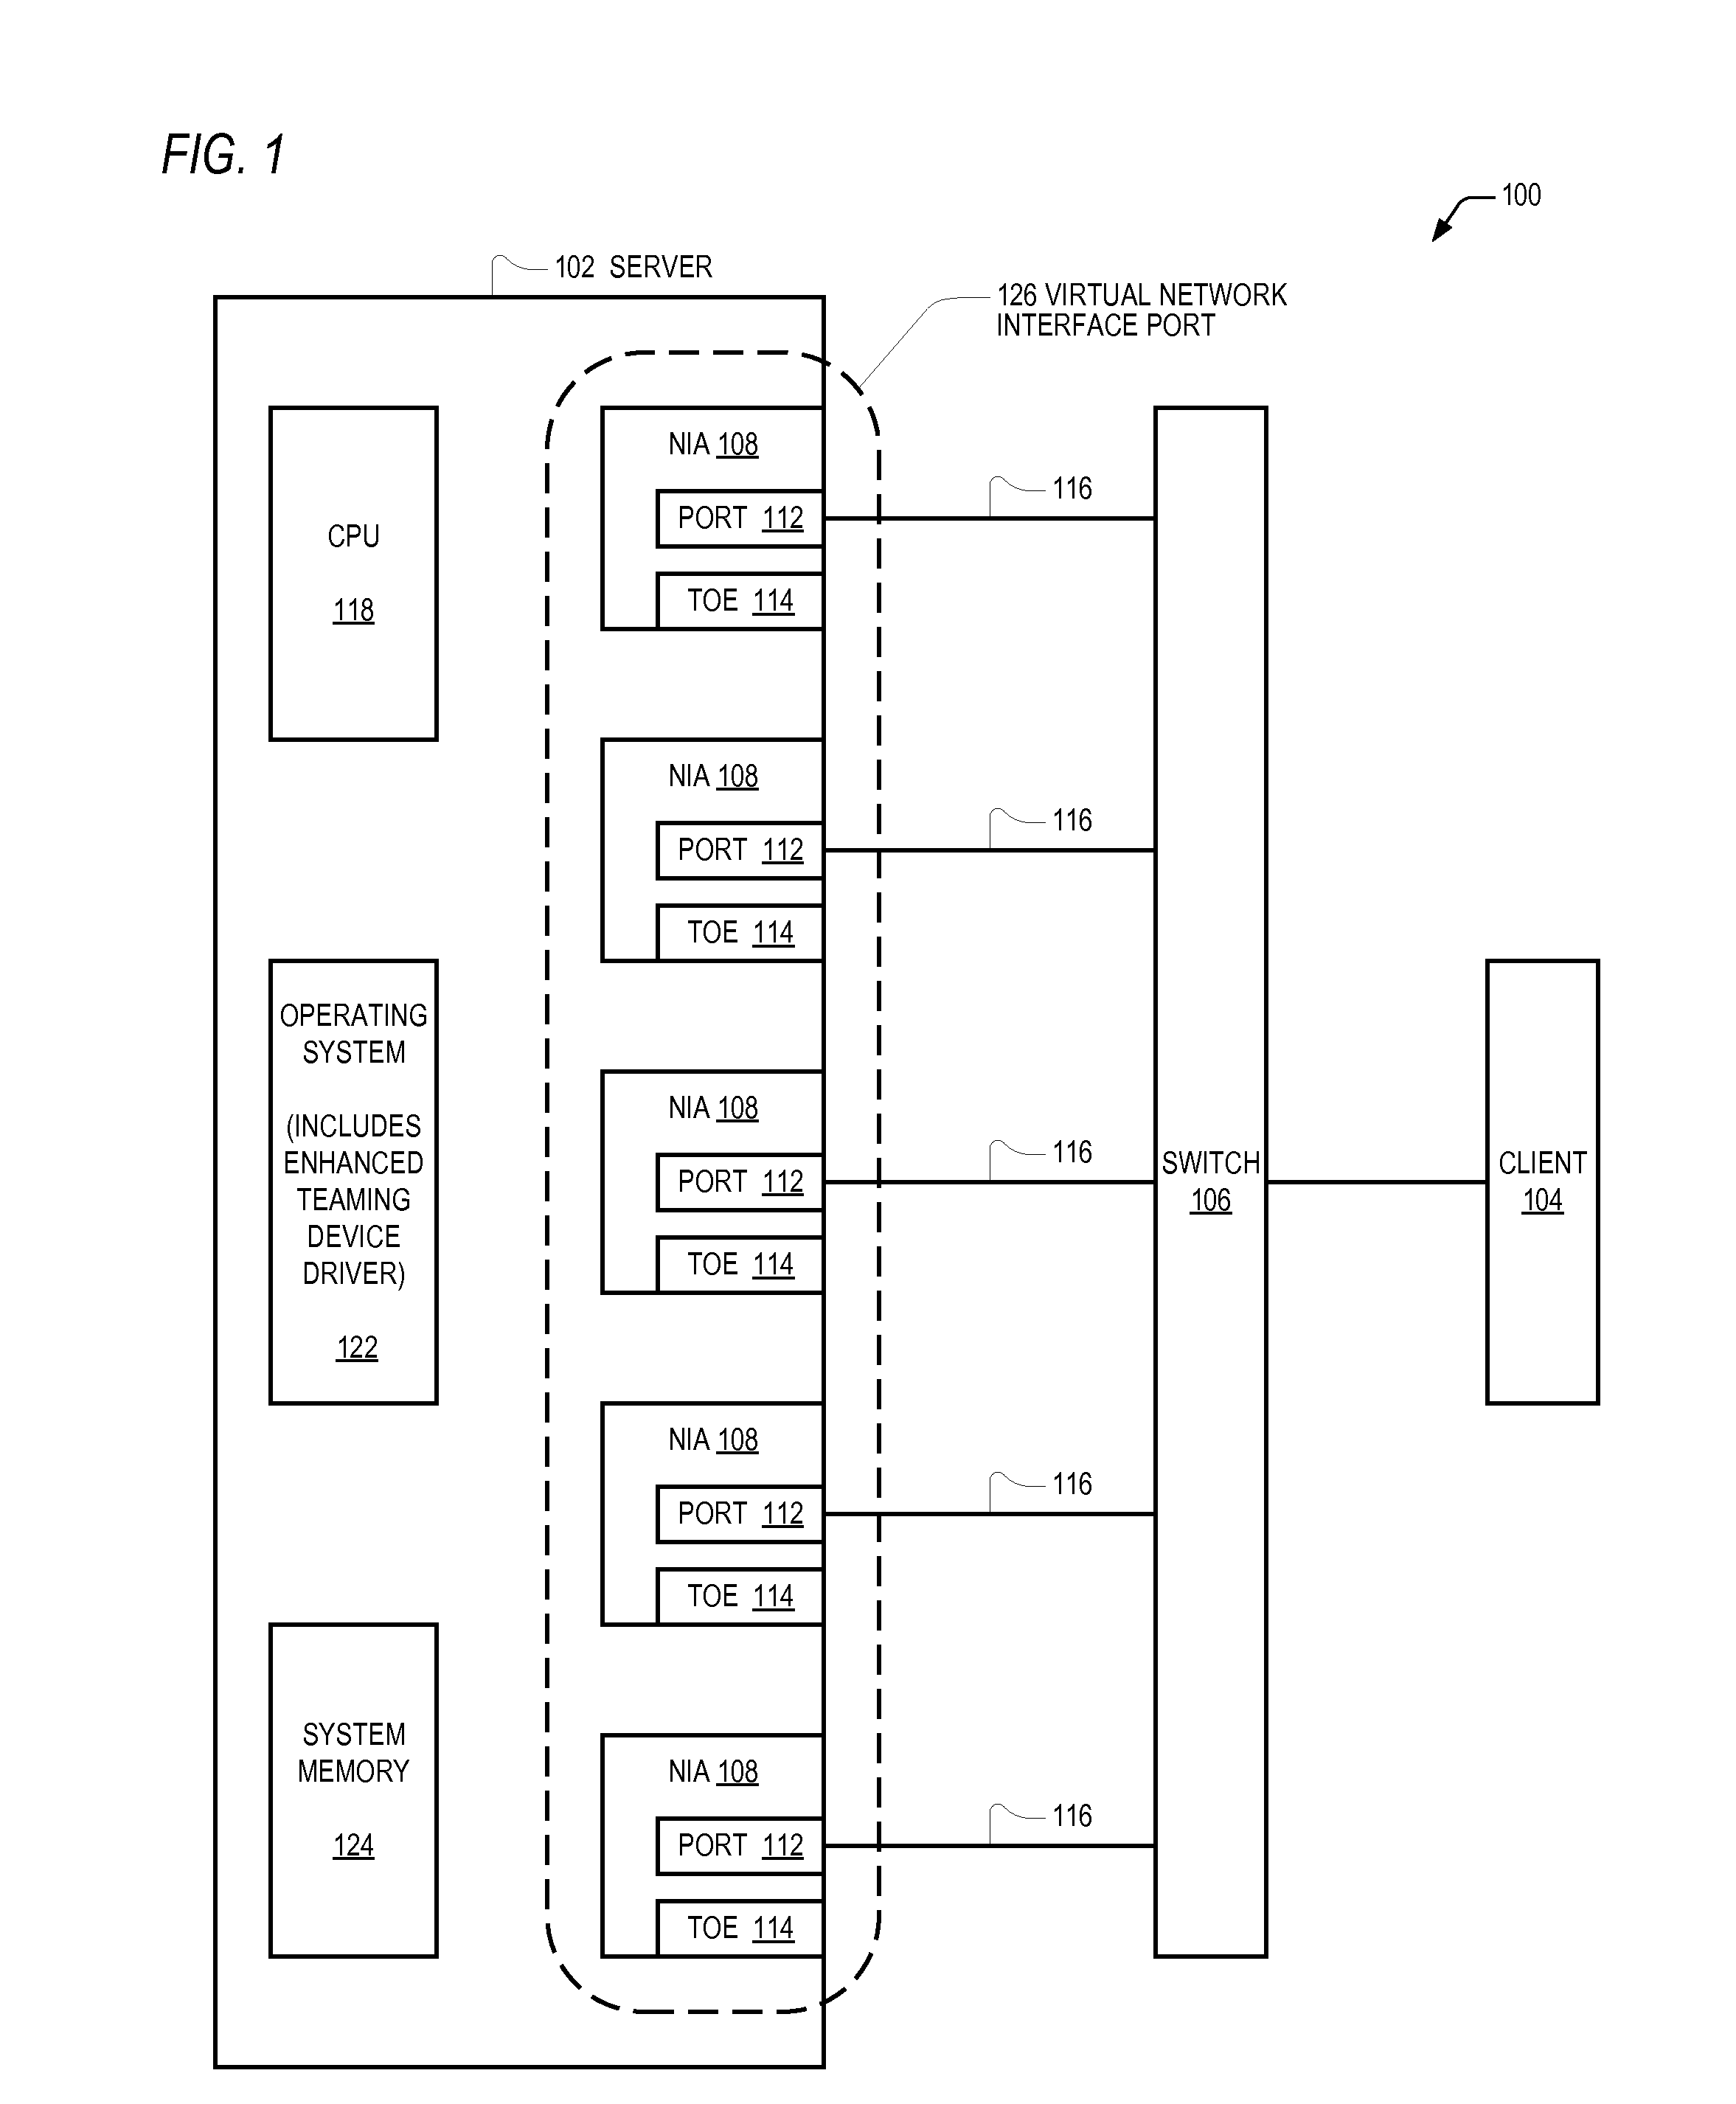 Adaptive receive path learning to facilitate combining TCP offloading and network adapter teaming